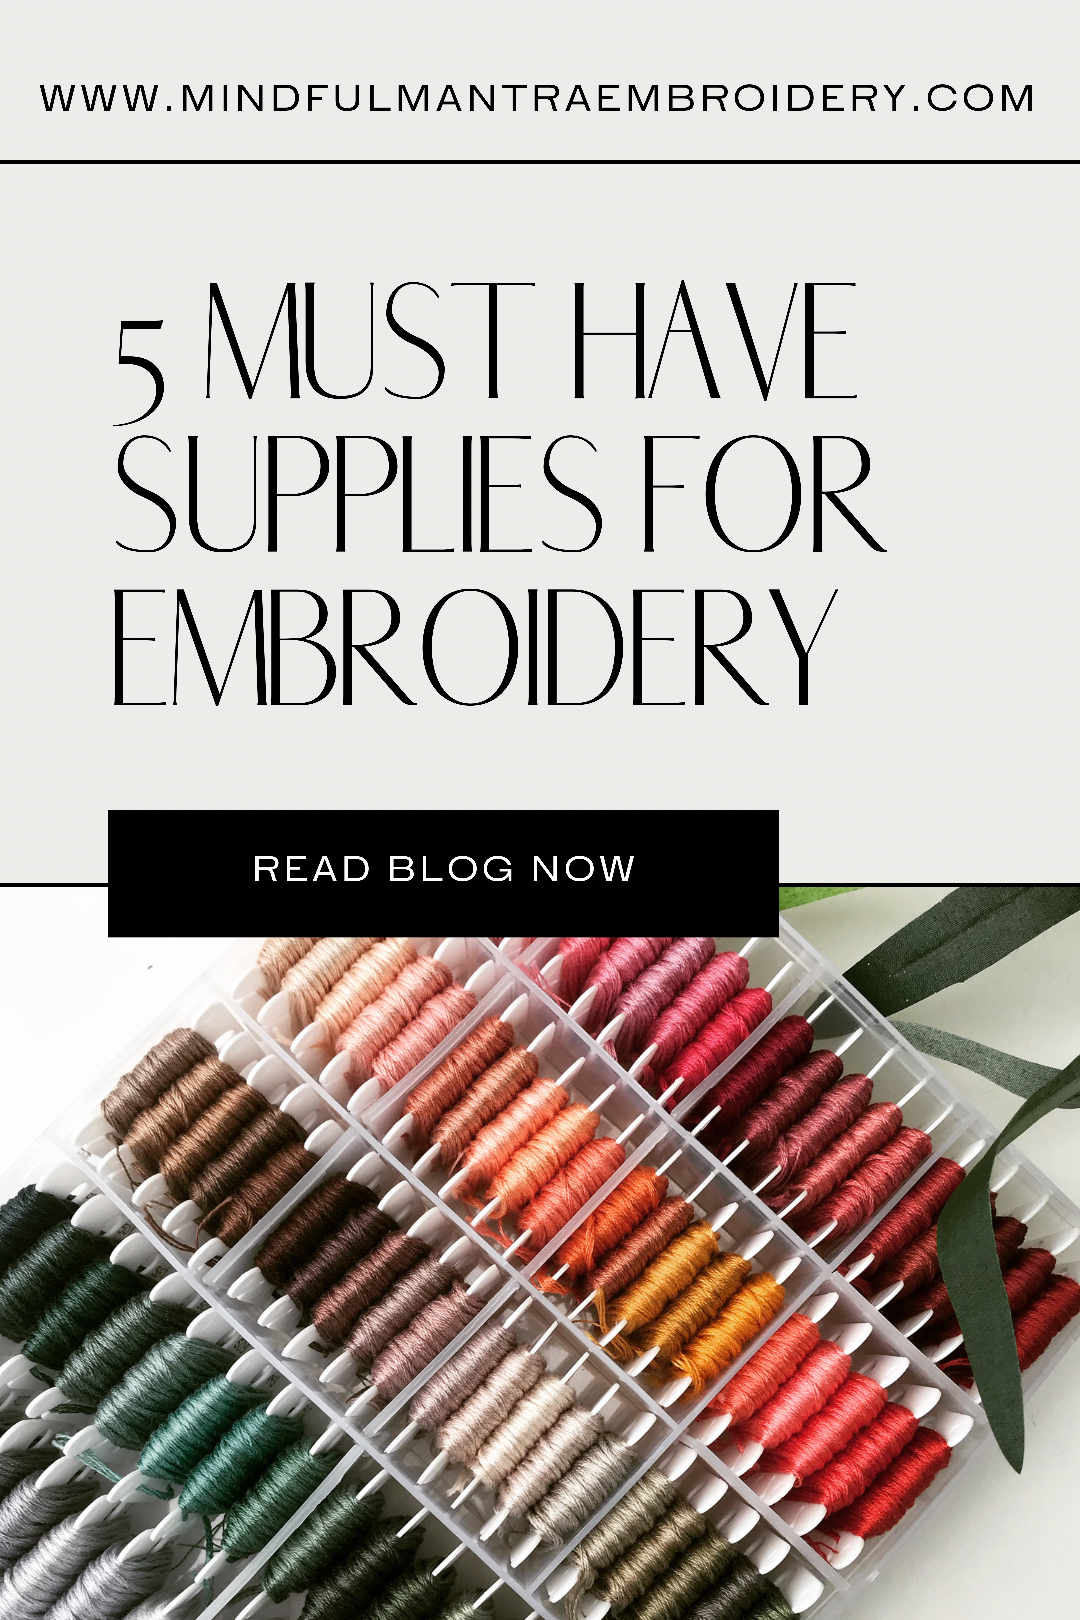 5 Must Have Supplies For Embroidery